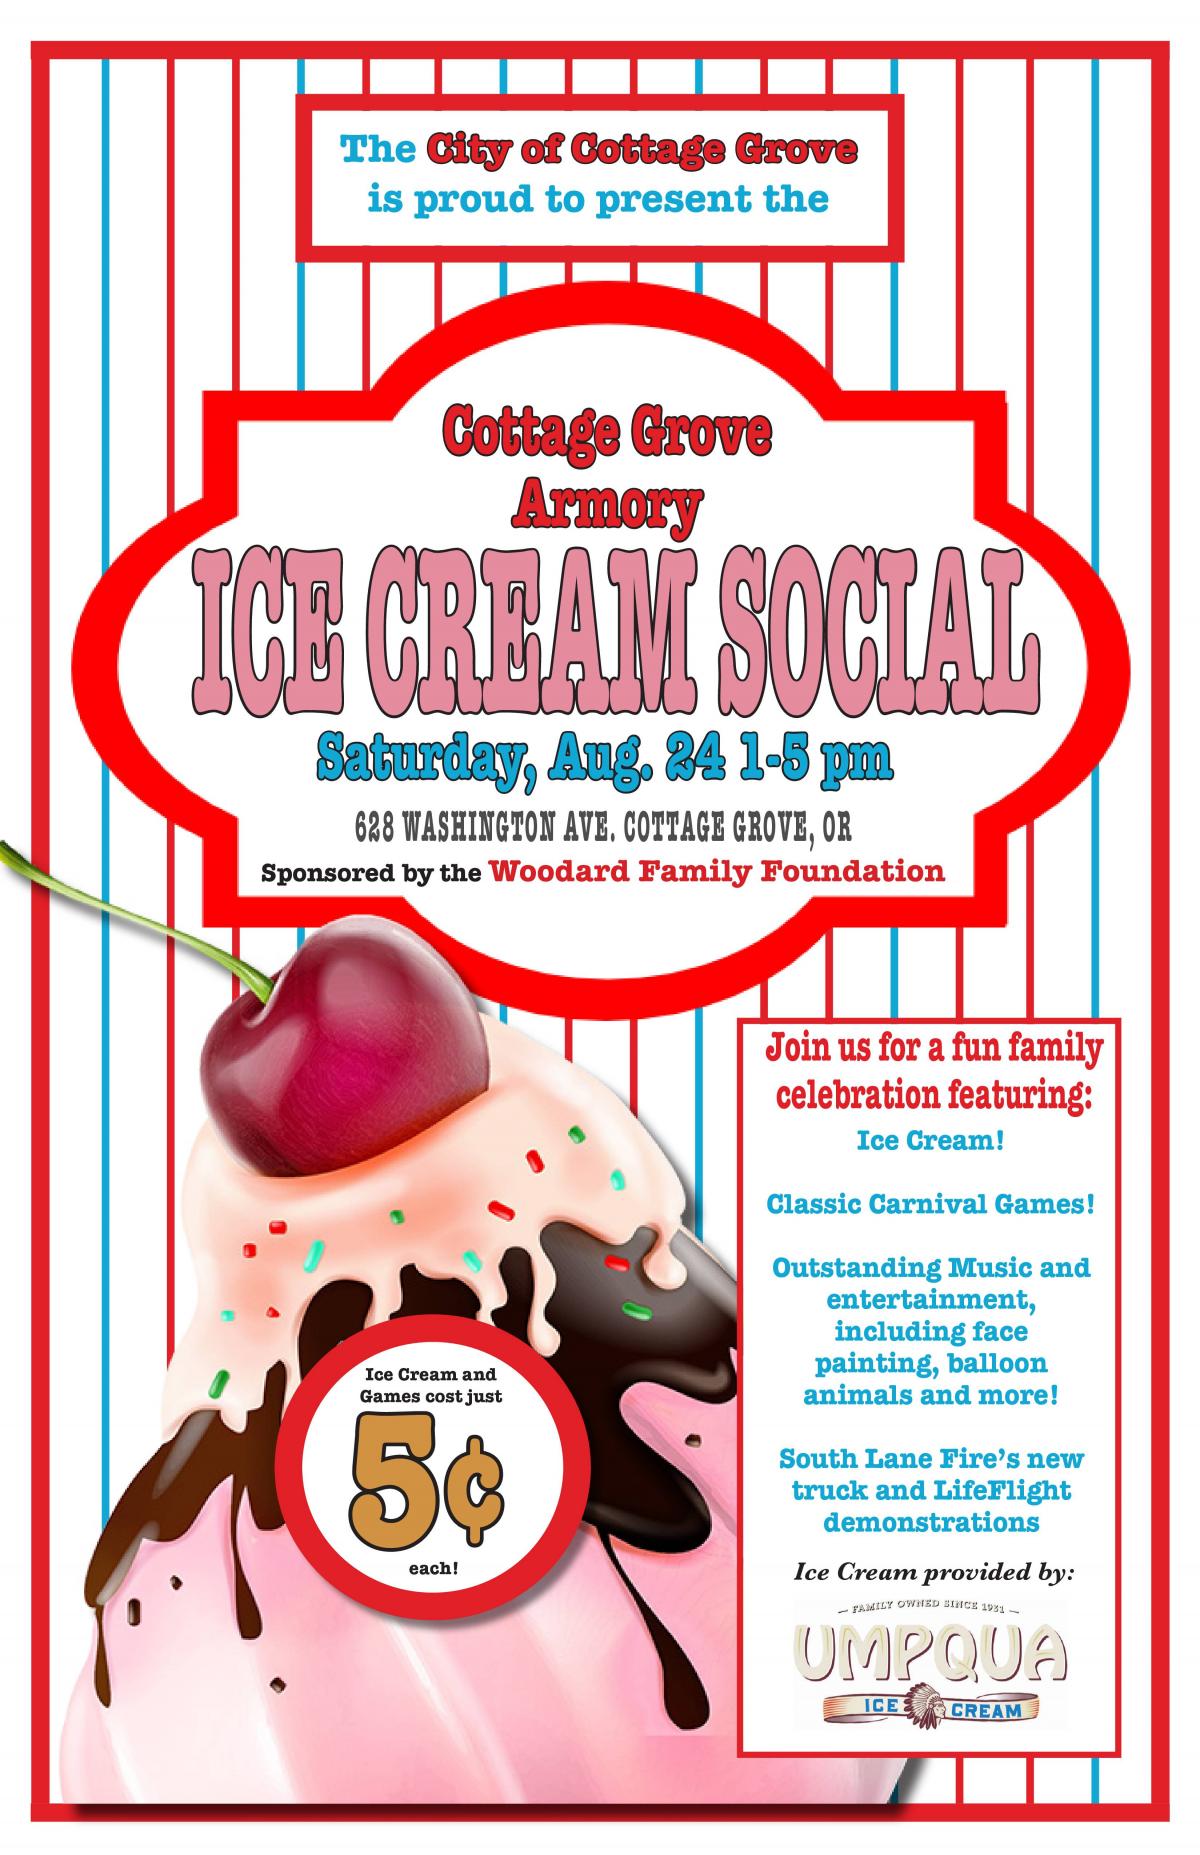 Cottage Grove Armory Ice Cream Social - Saturday, August 24, 2019 -1:00 to 5:00 pm